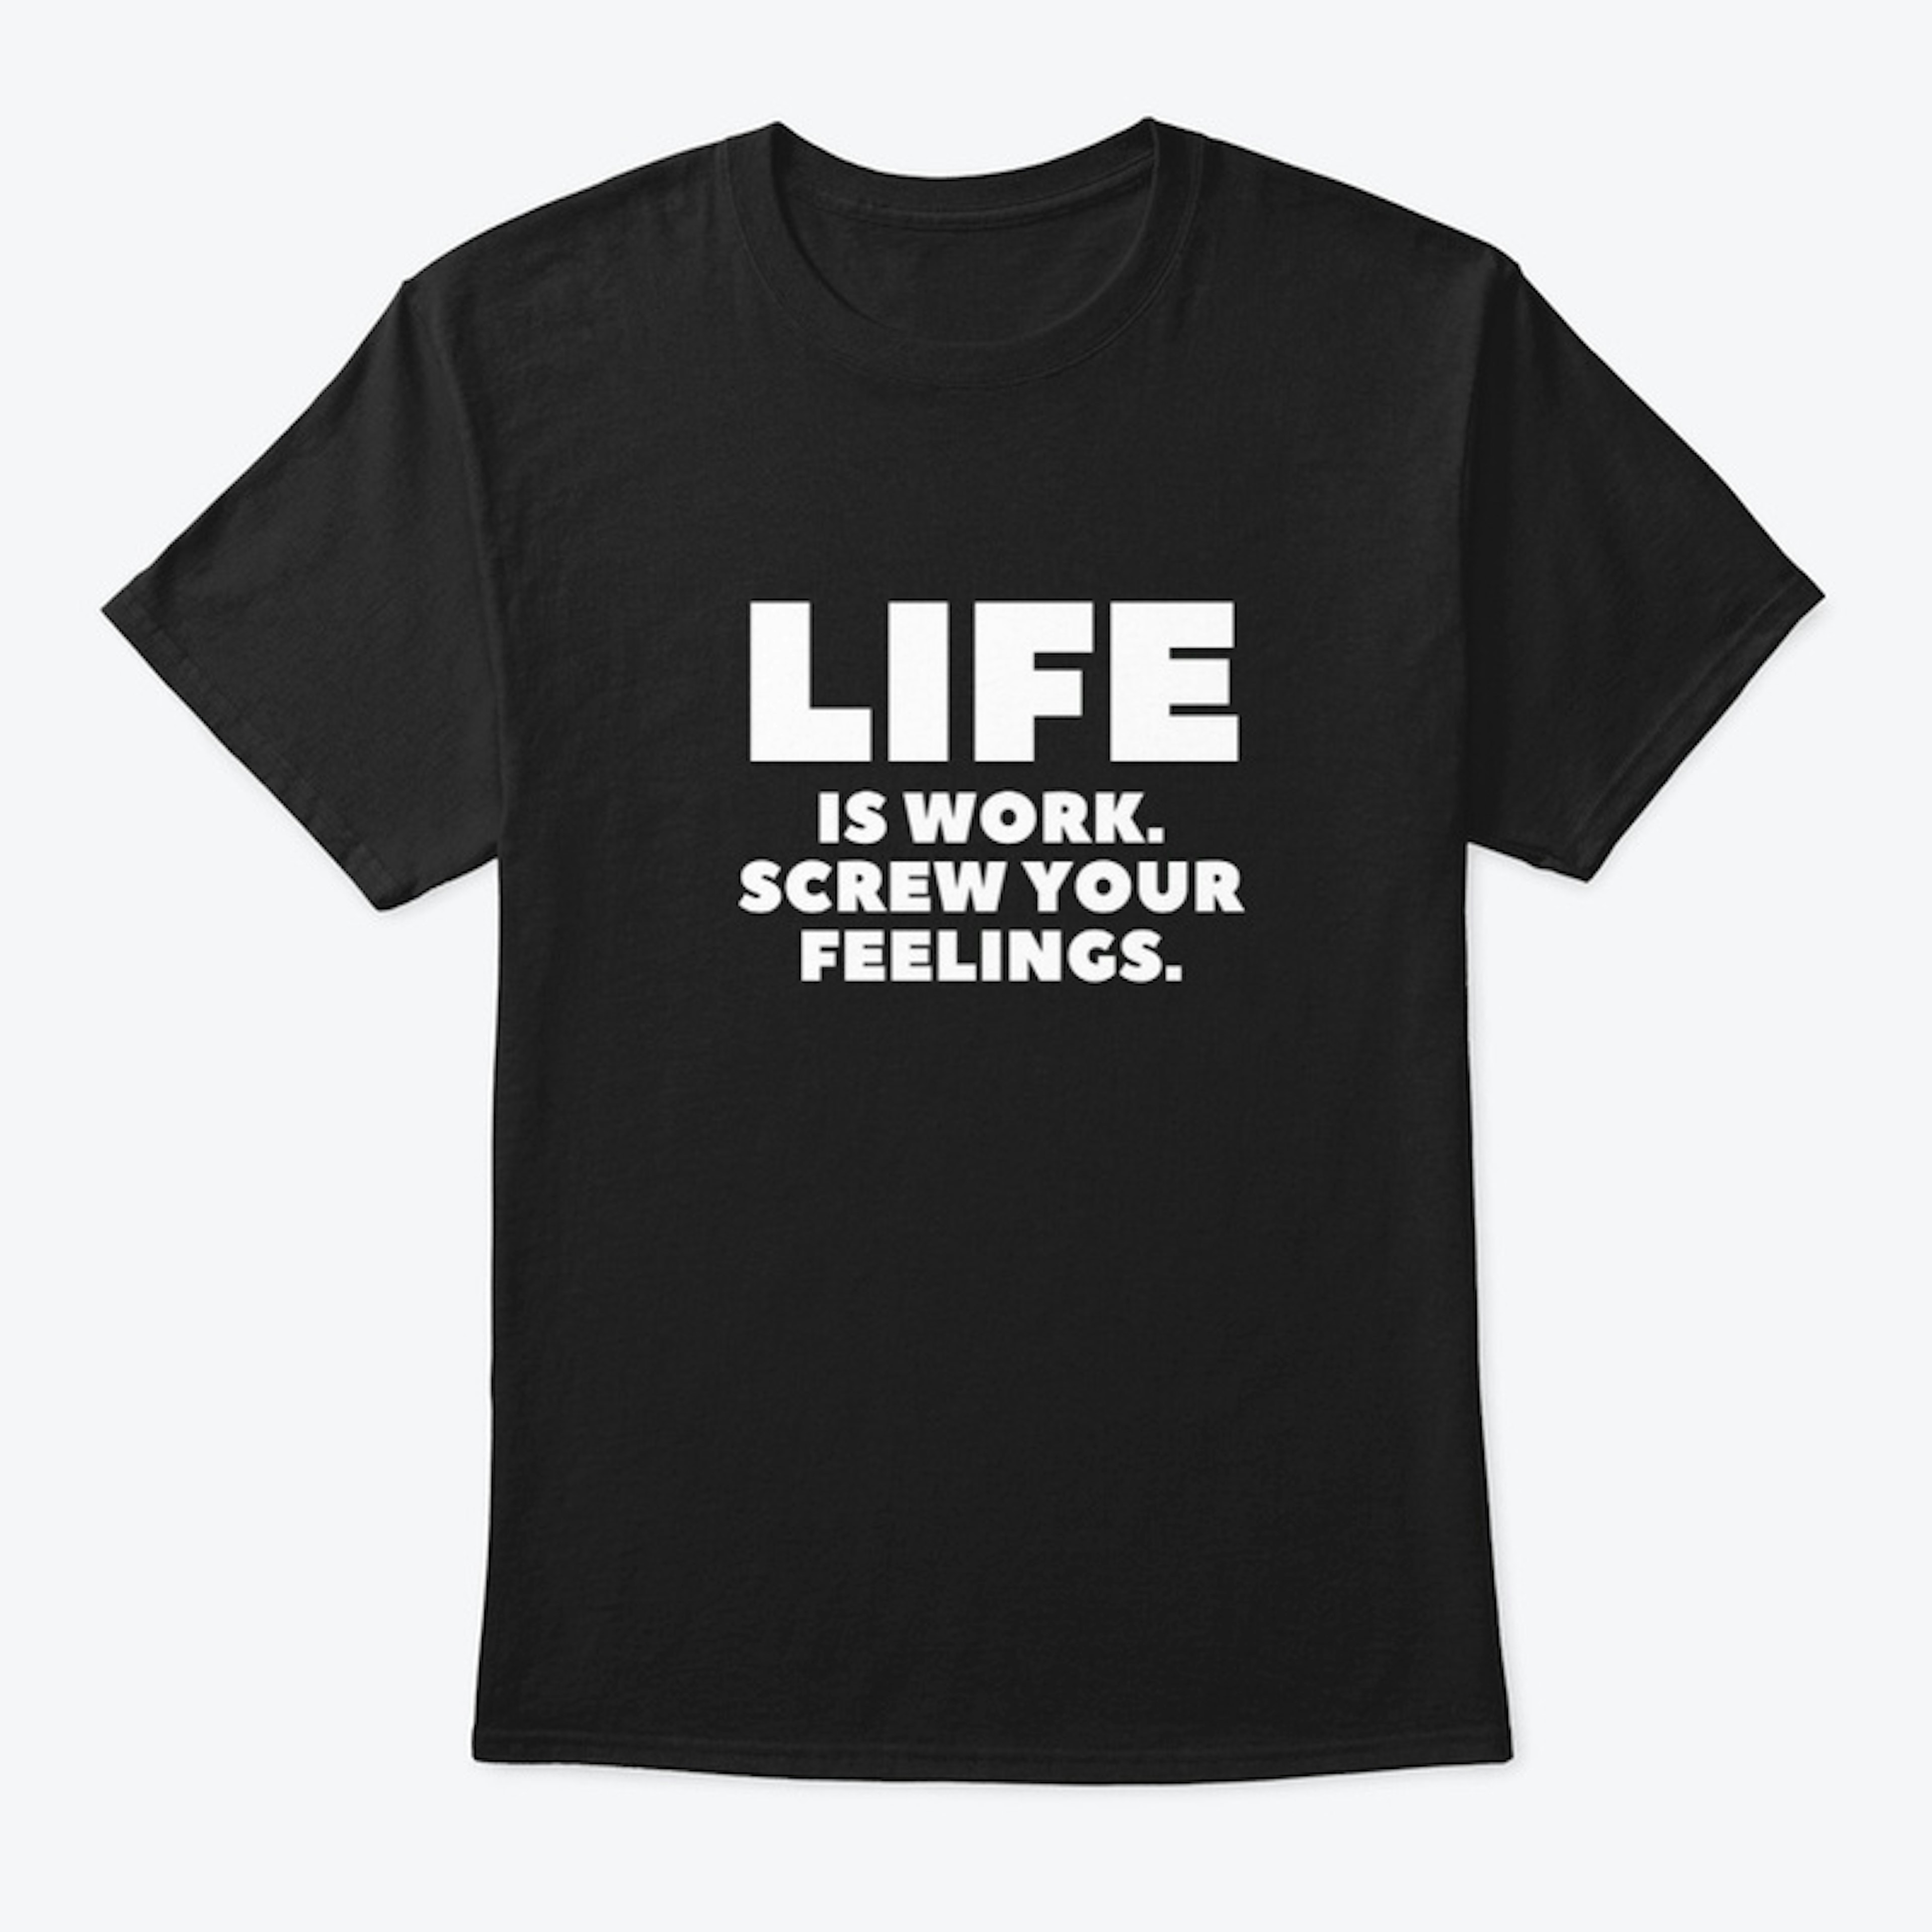 Life is work scr*w your feelings T shirt